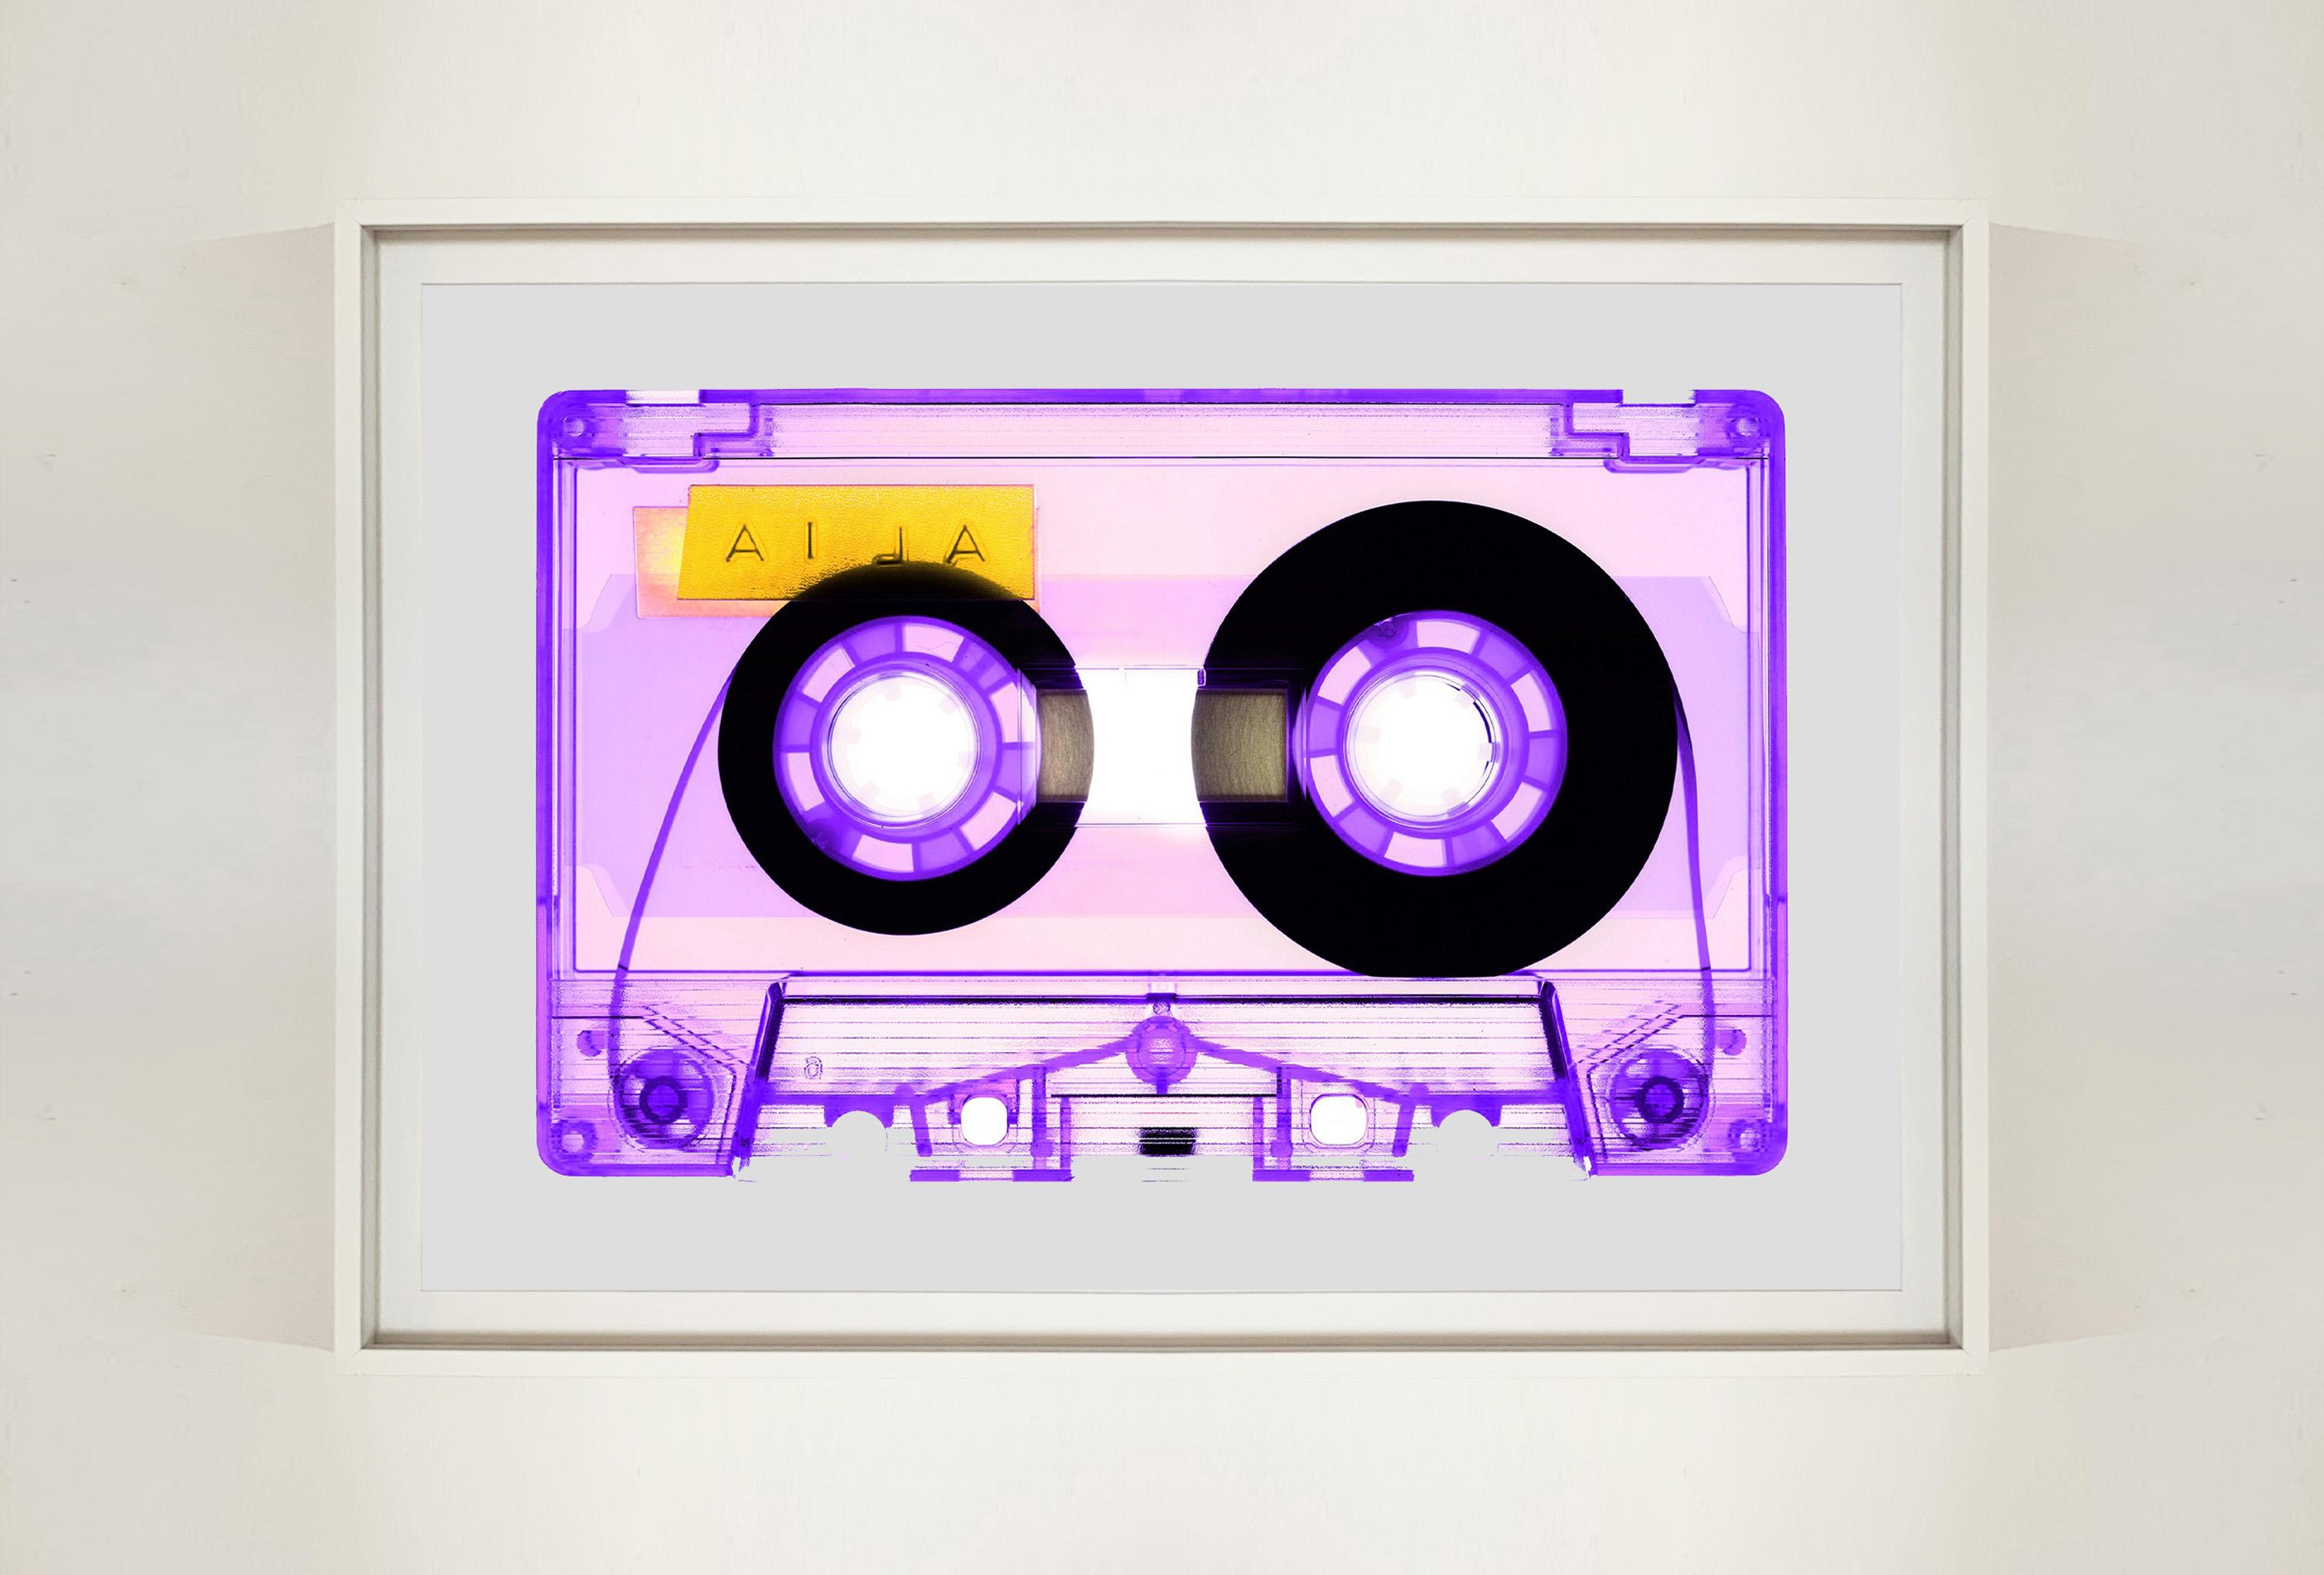 AILA Purple, from the Heidler & Heeps Tape Collection - The B Sides.
The Heidler & Heeps collaborations are creative representations of Natasha Heidler and Richard Heeps’, personal past and their personalities. Tapes are significant in both their